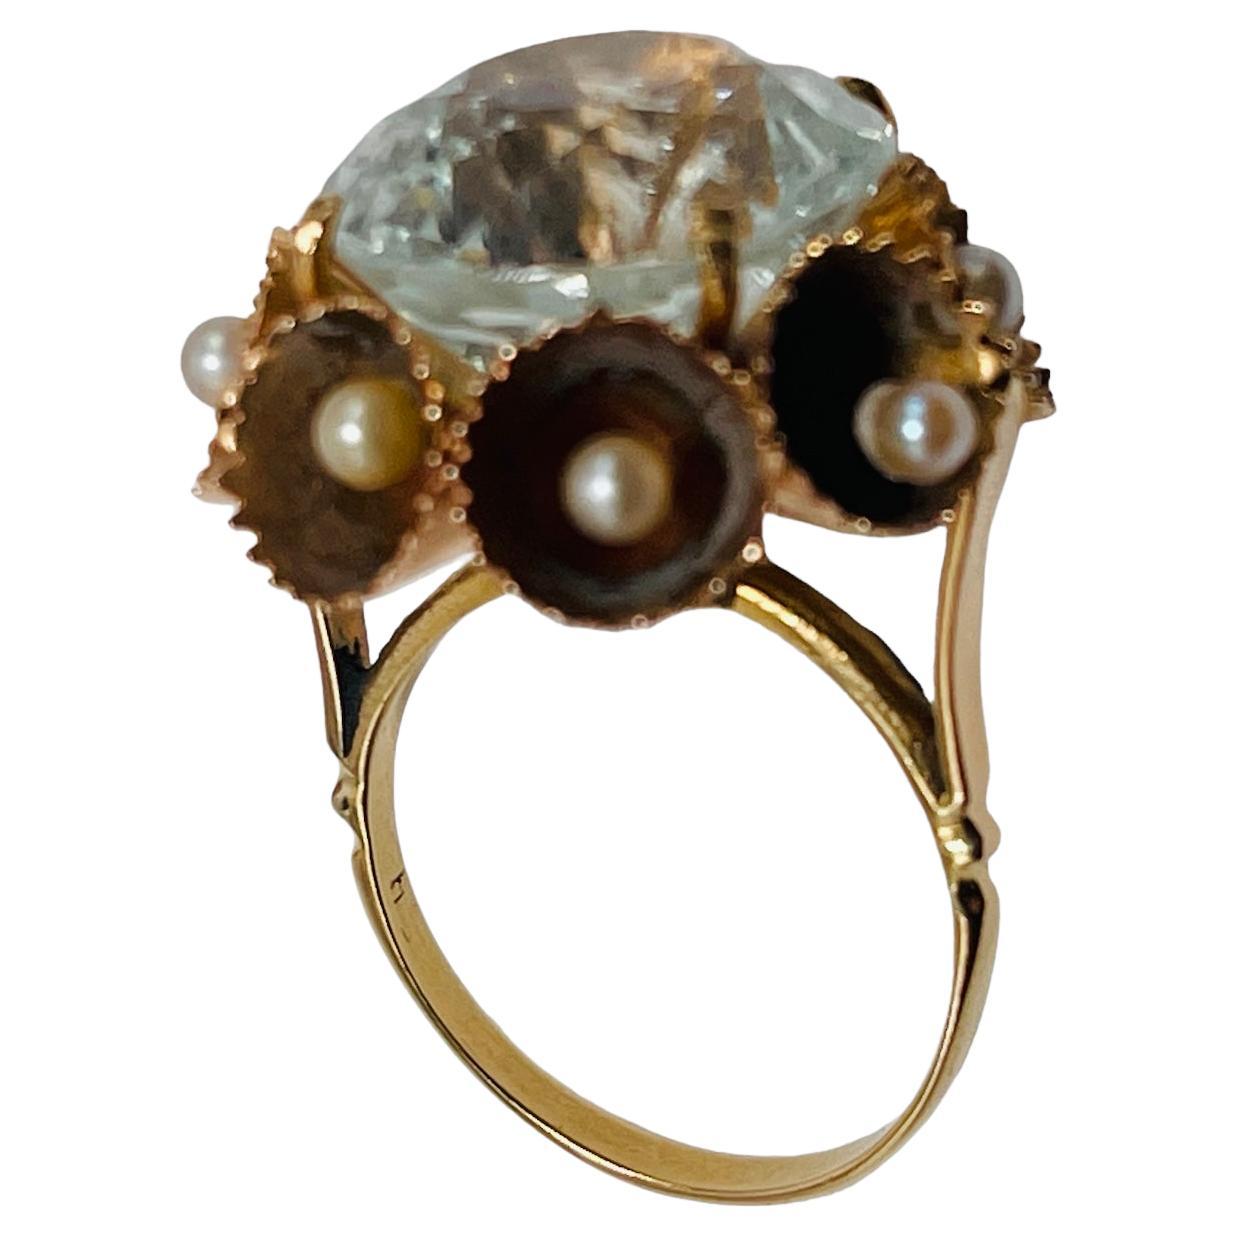 This a 14K yellow gold ring. It depicts a Brilliant Shape White Sapphire (15.18 x 15.18 x 9.73 mm ) weighing 16.14 carats and mounted on four gold prongs setting. The White Sapphire is adorned around it with a wreath made of gold trumpets with